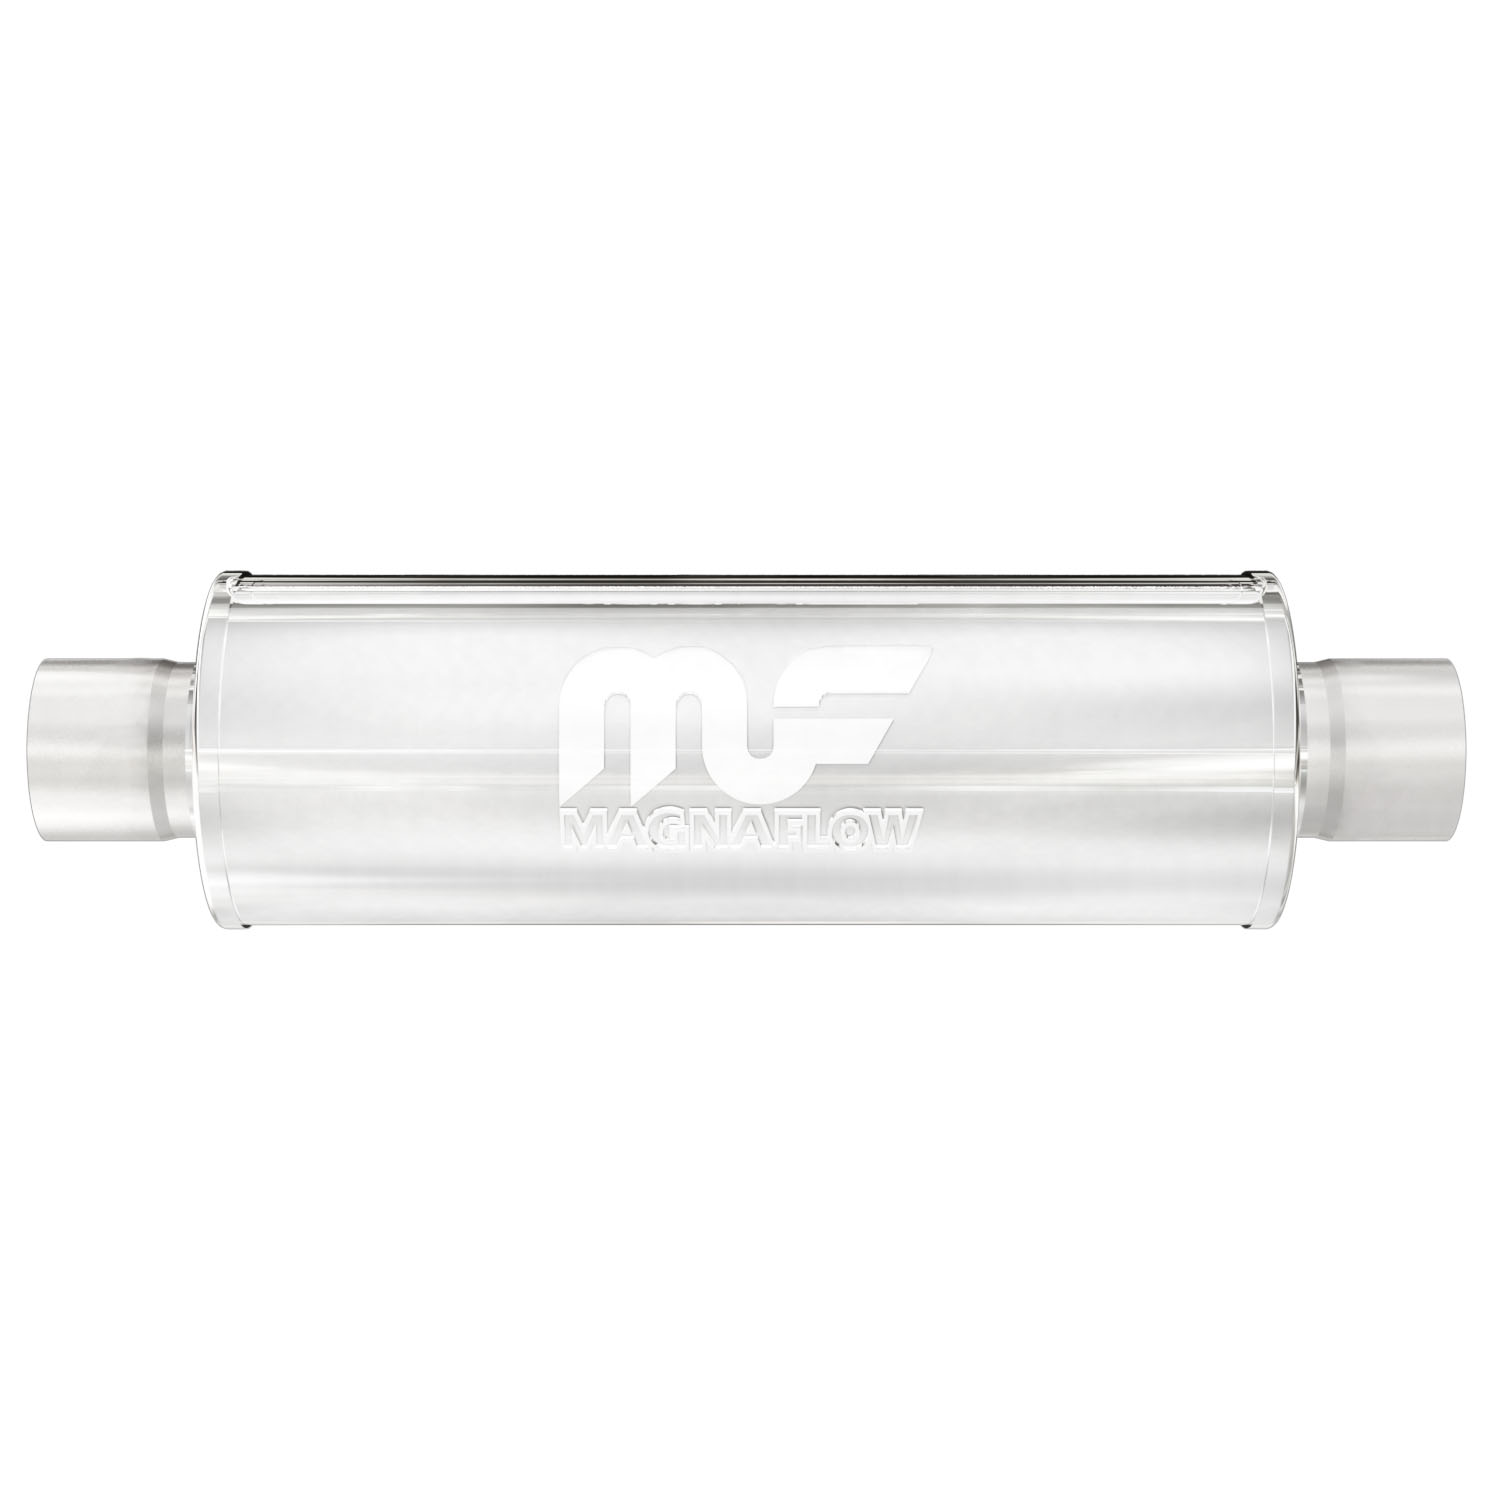 6" Round Muffler Center In/Center Out: 3" Body Length: 30" Overall Length: 36" Core Size: 3" Polished Finish